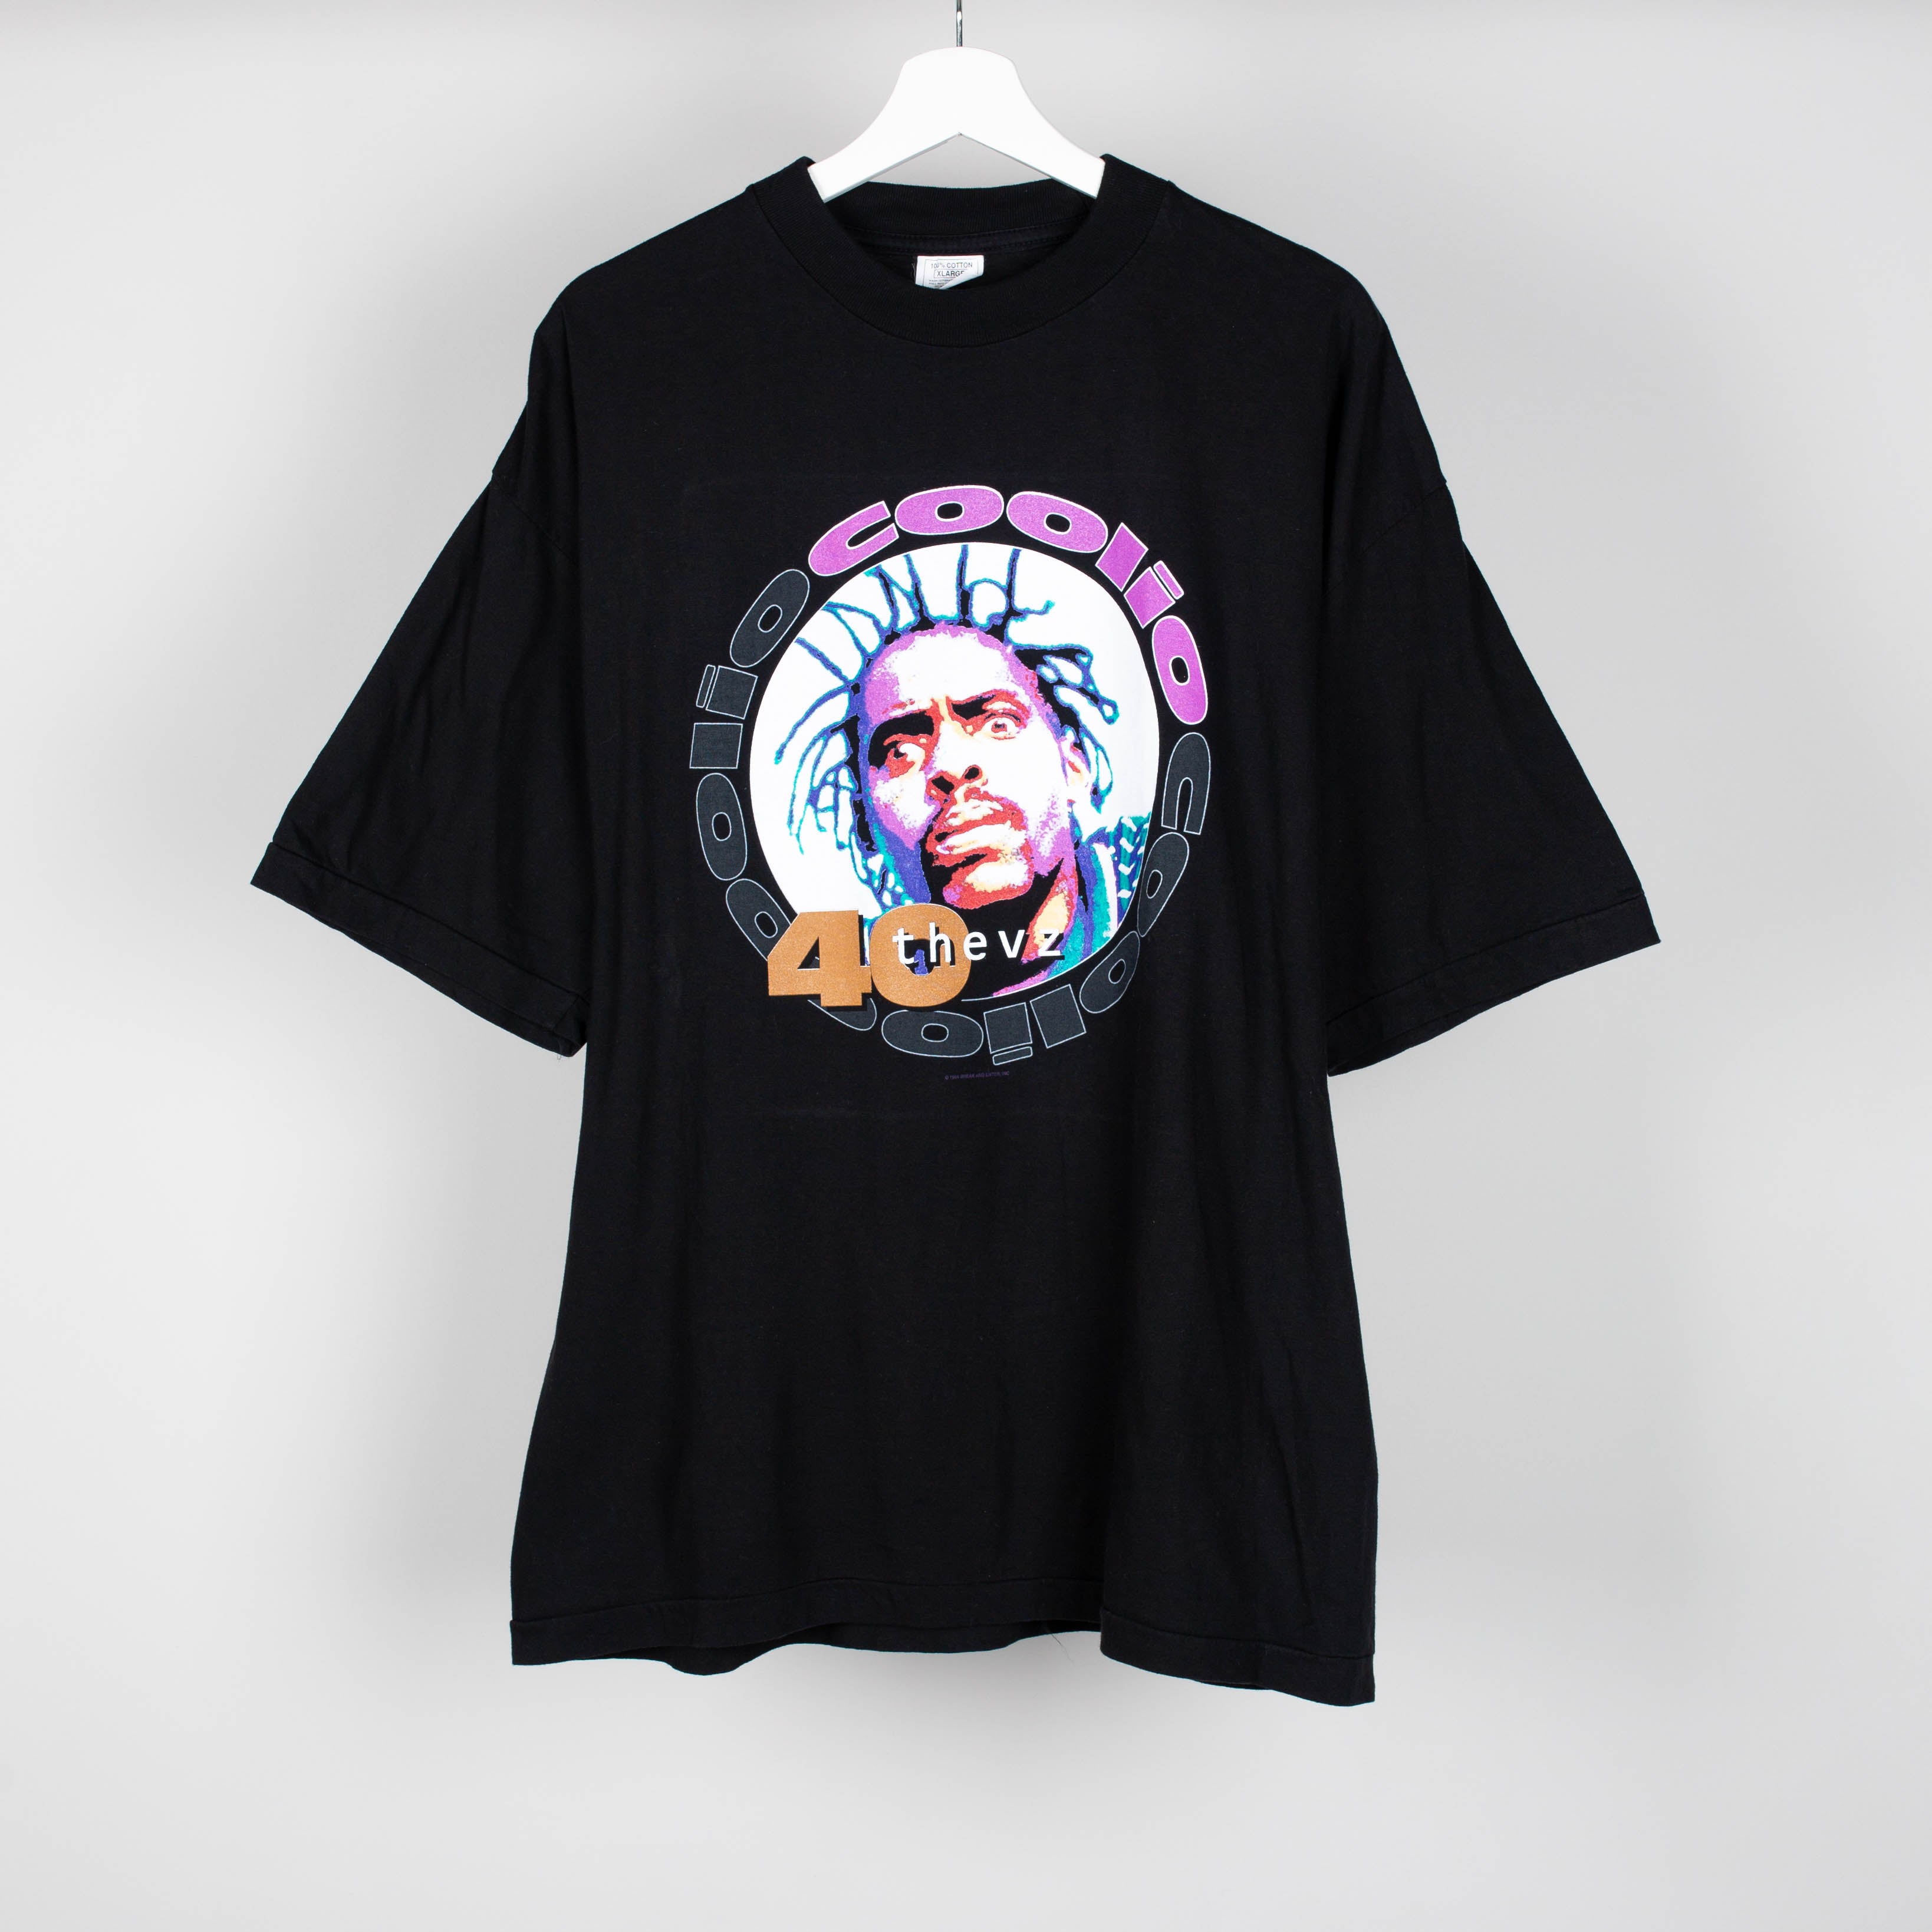 1994 Coolio 40 Thevs T-Shirt Size XL